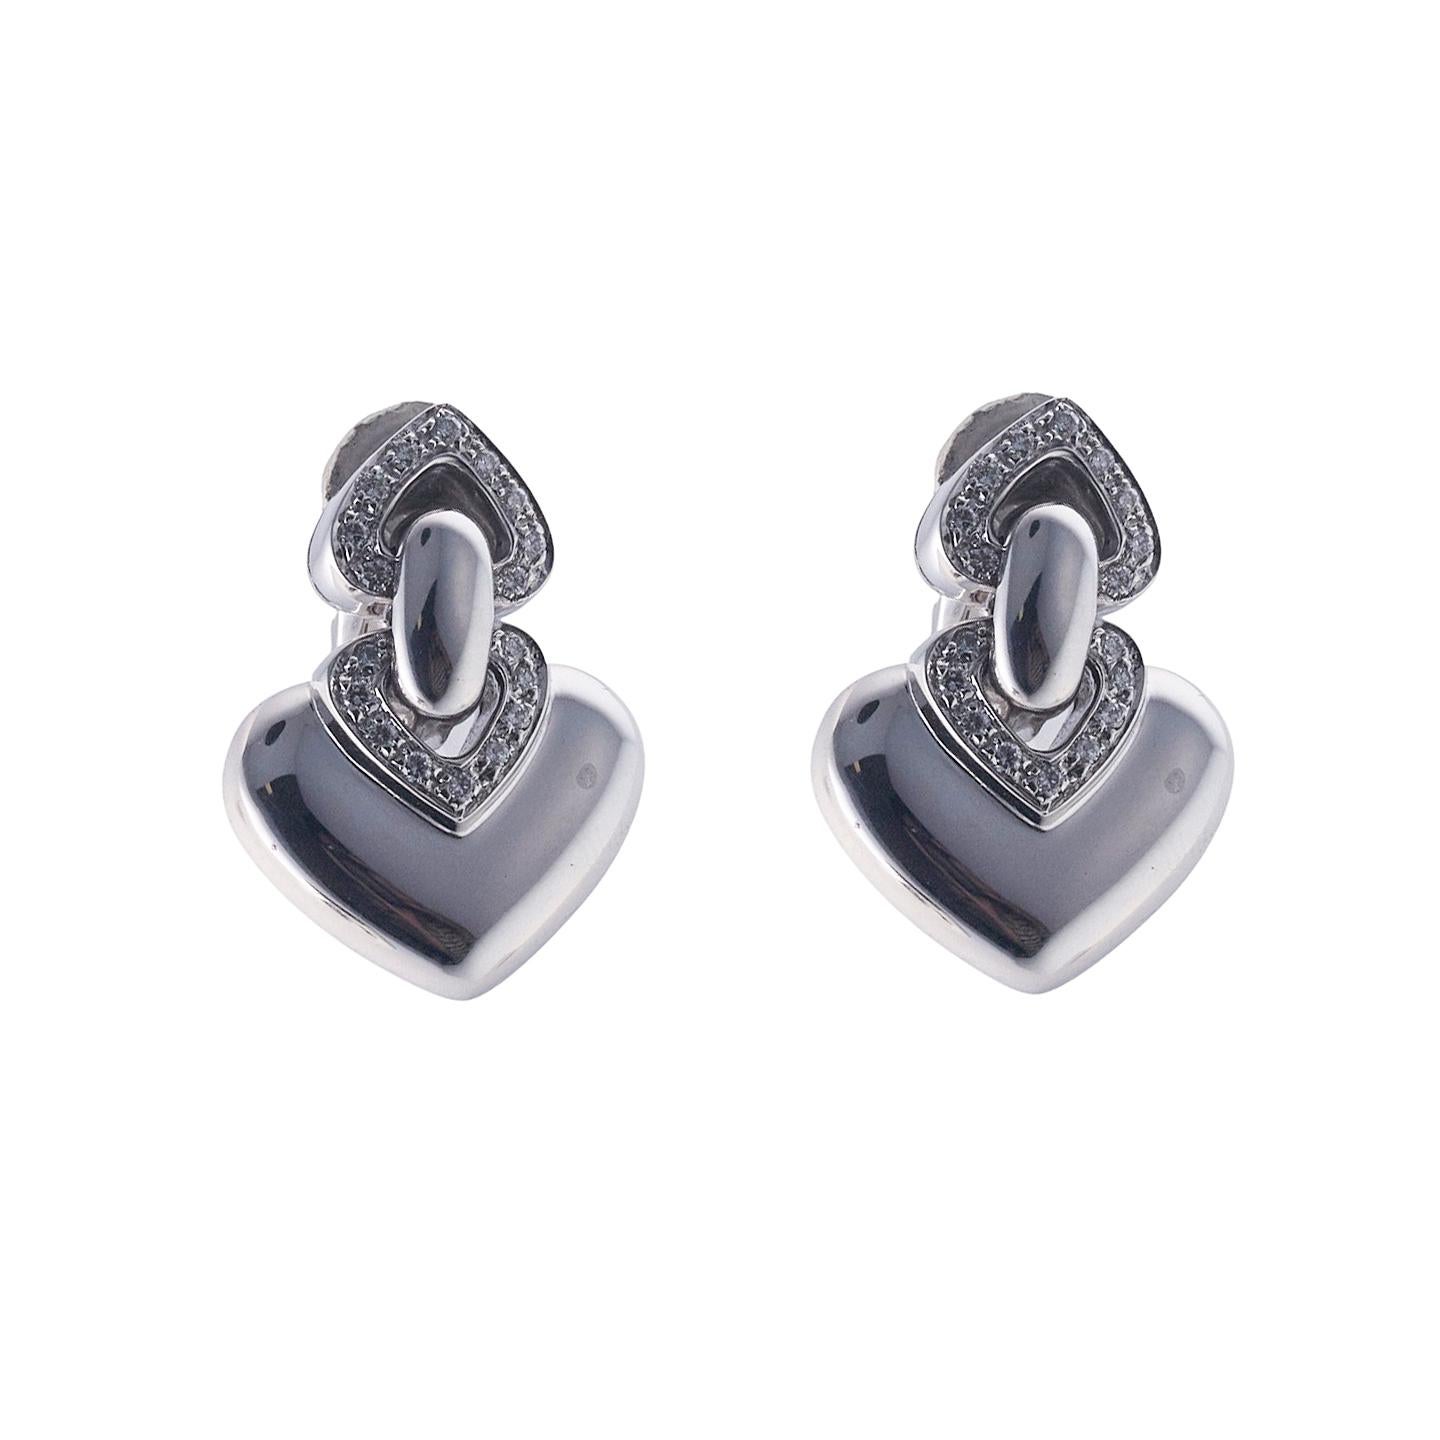 Pair of 18k white gold drop earrings by Bvlgari for Doppio Cuore collection, set with approx. 0.36ctw in VS/G diamonds. Earrings measure 24mm x 16mm. Marked: Bvlgari, Made in Italy, 750. Weight is 21.1 grams.